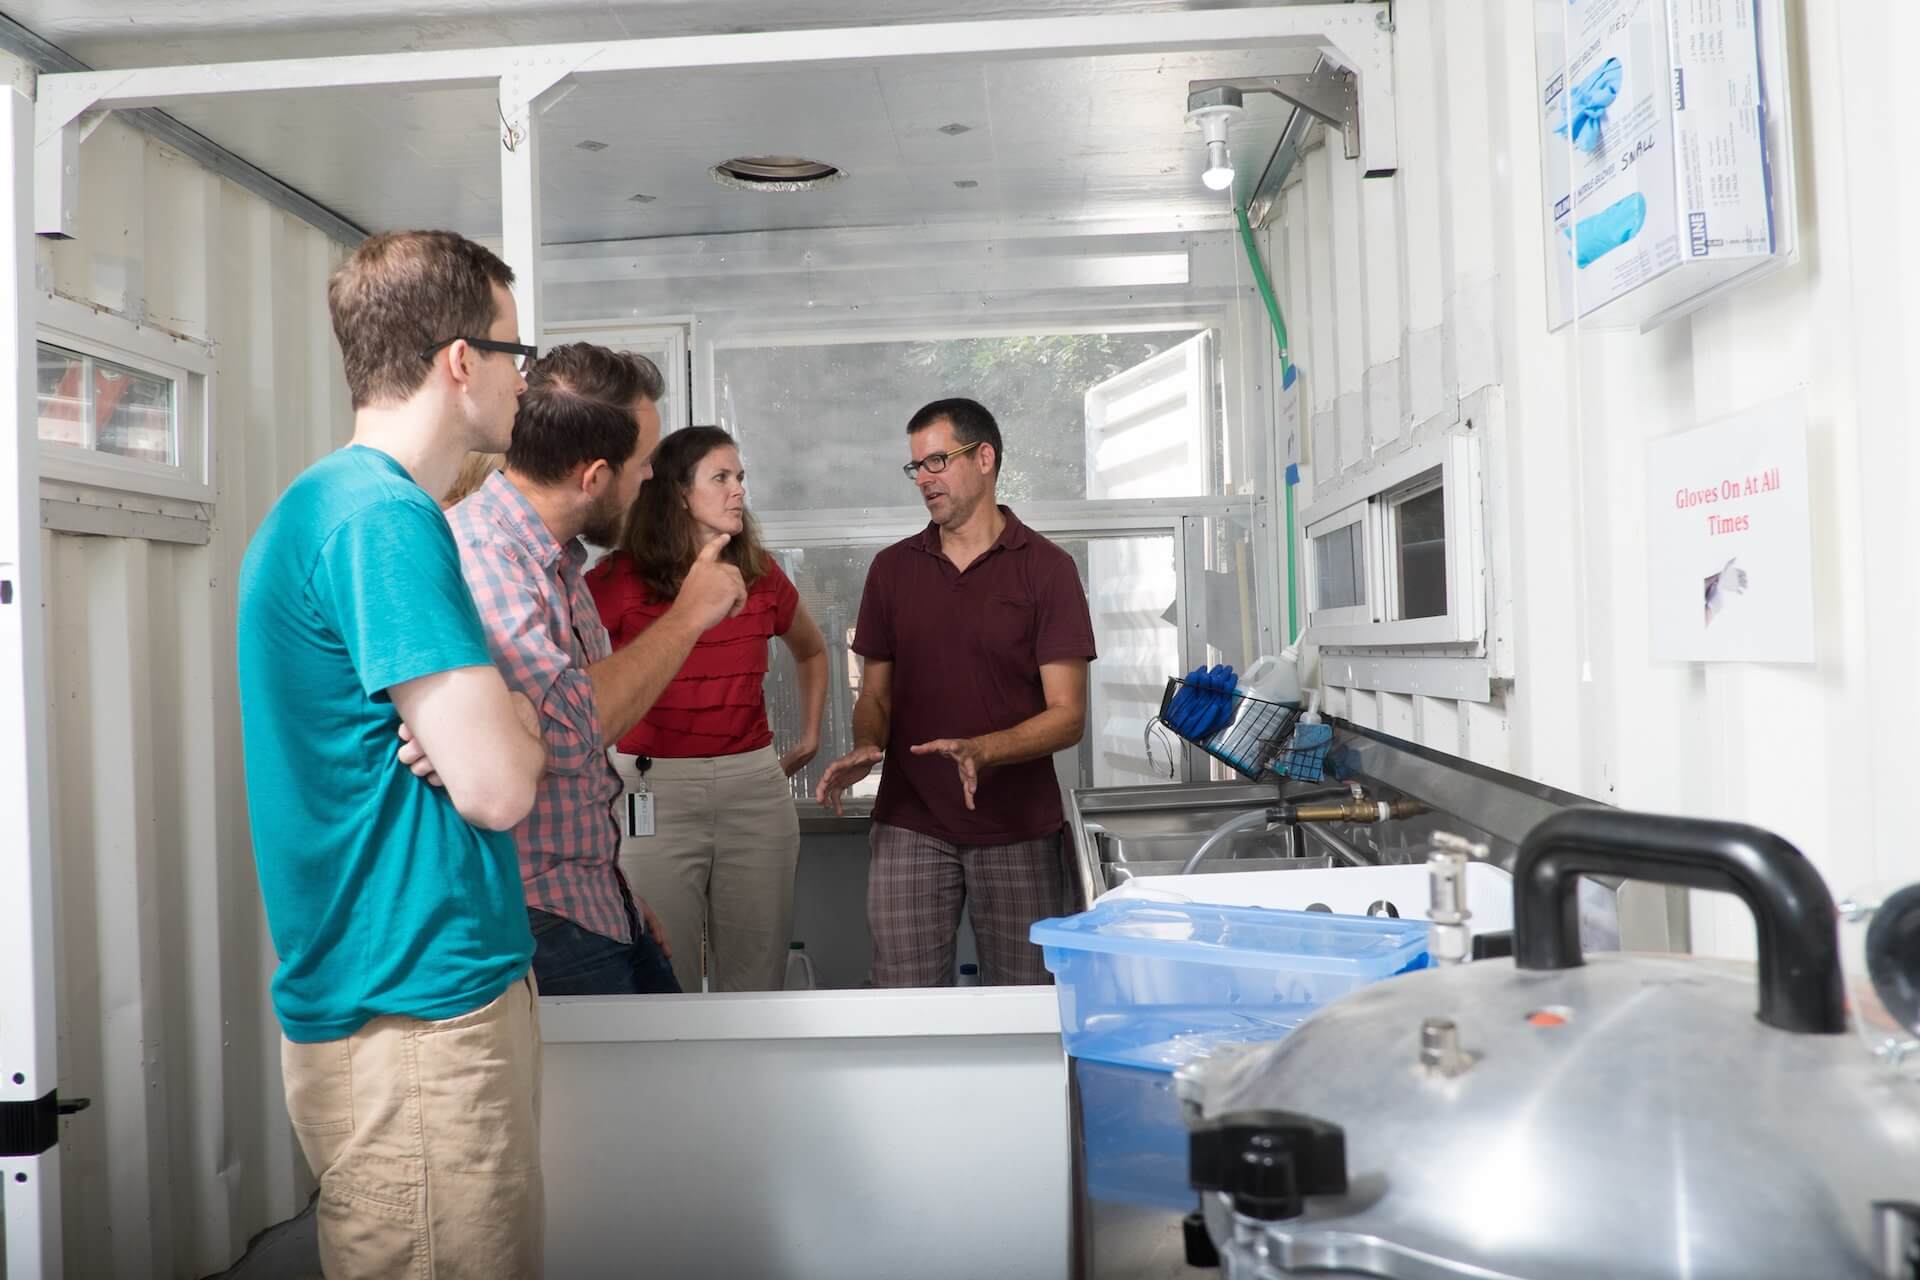 Rice University professors Maria Oden, second from right, and Douglas Schuler, right, give visitors a tour of the Sterile Box prototype. The unit was designed to sterilize and process surgical instruments in low-resource settings. (Credit: Jeff Fitlow)